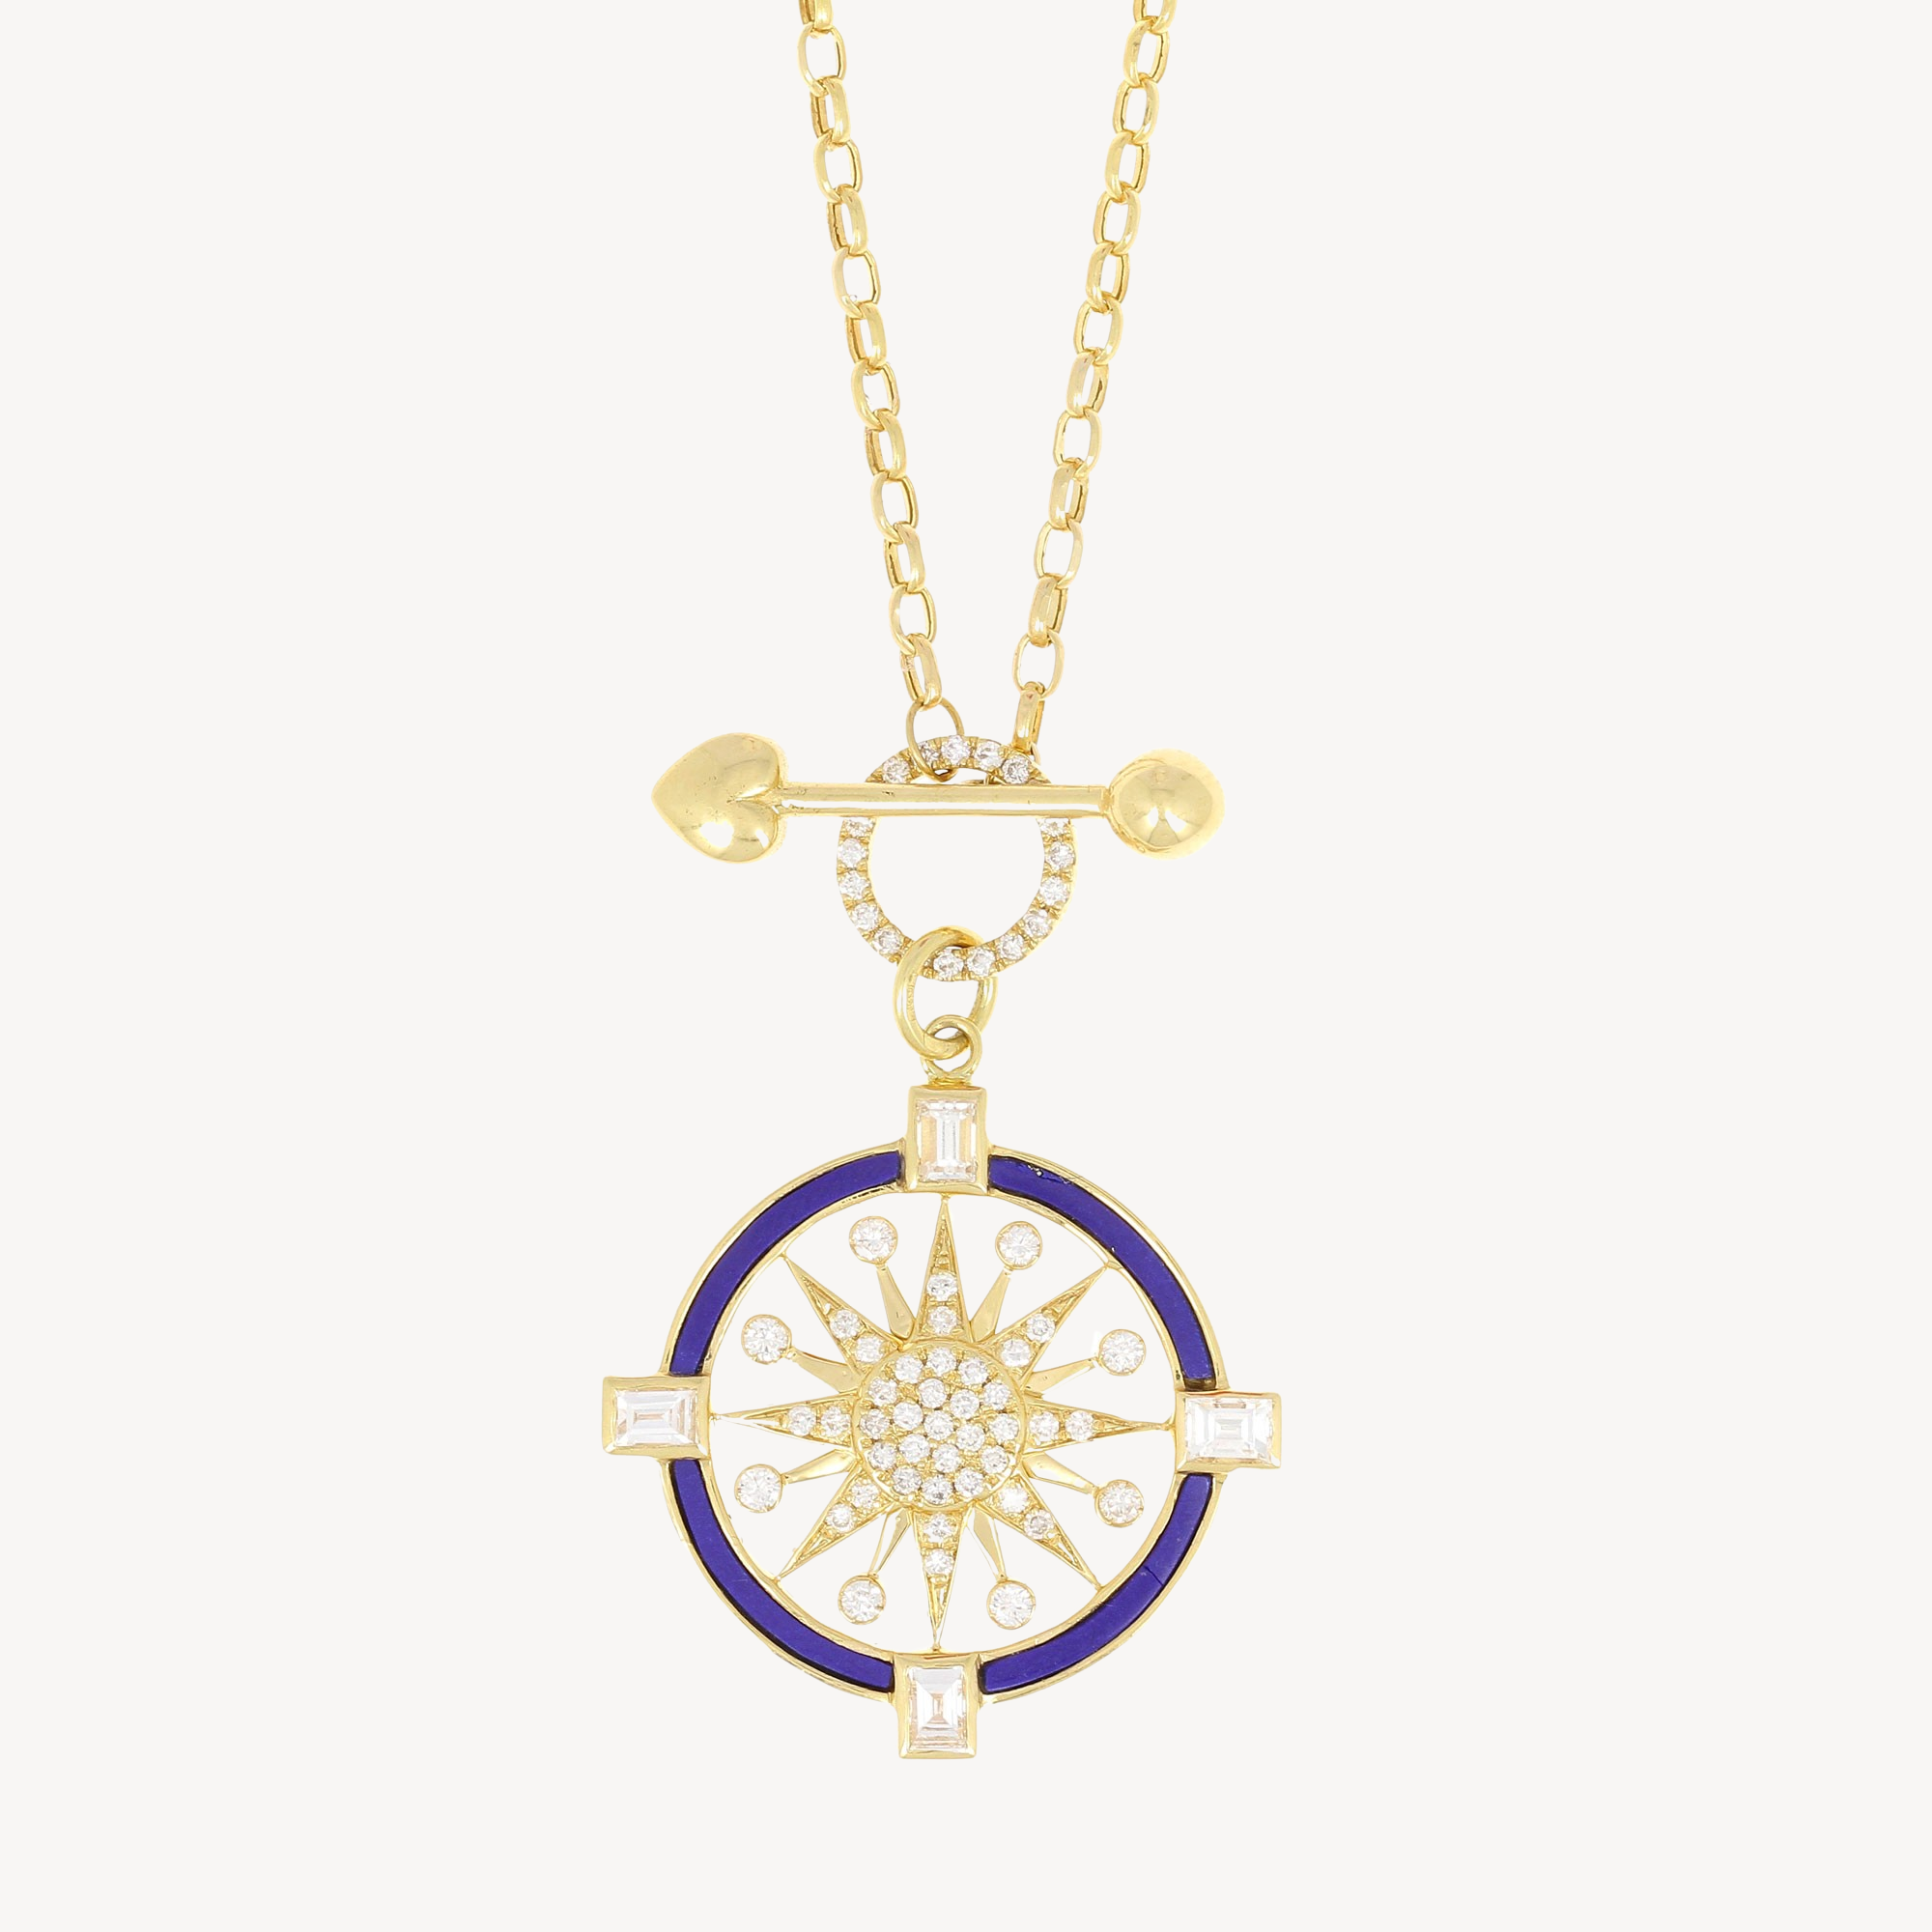 Compass Necklace with Lapis Stone